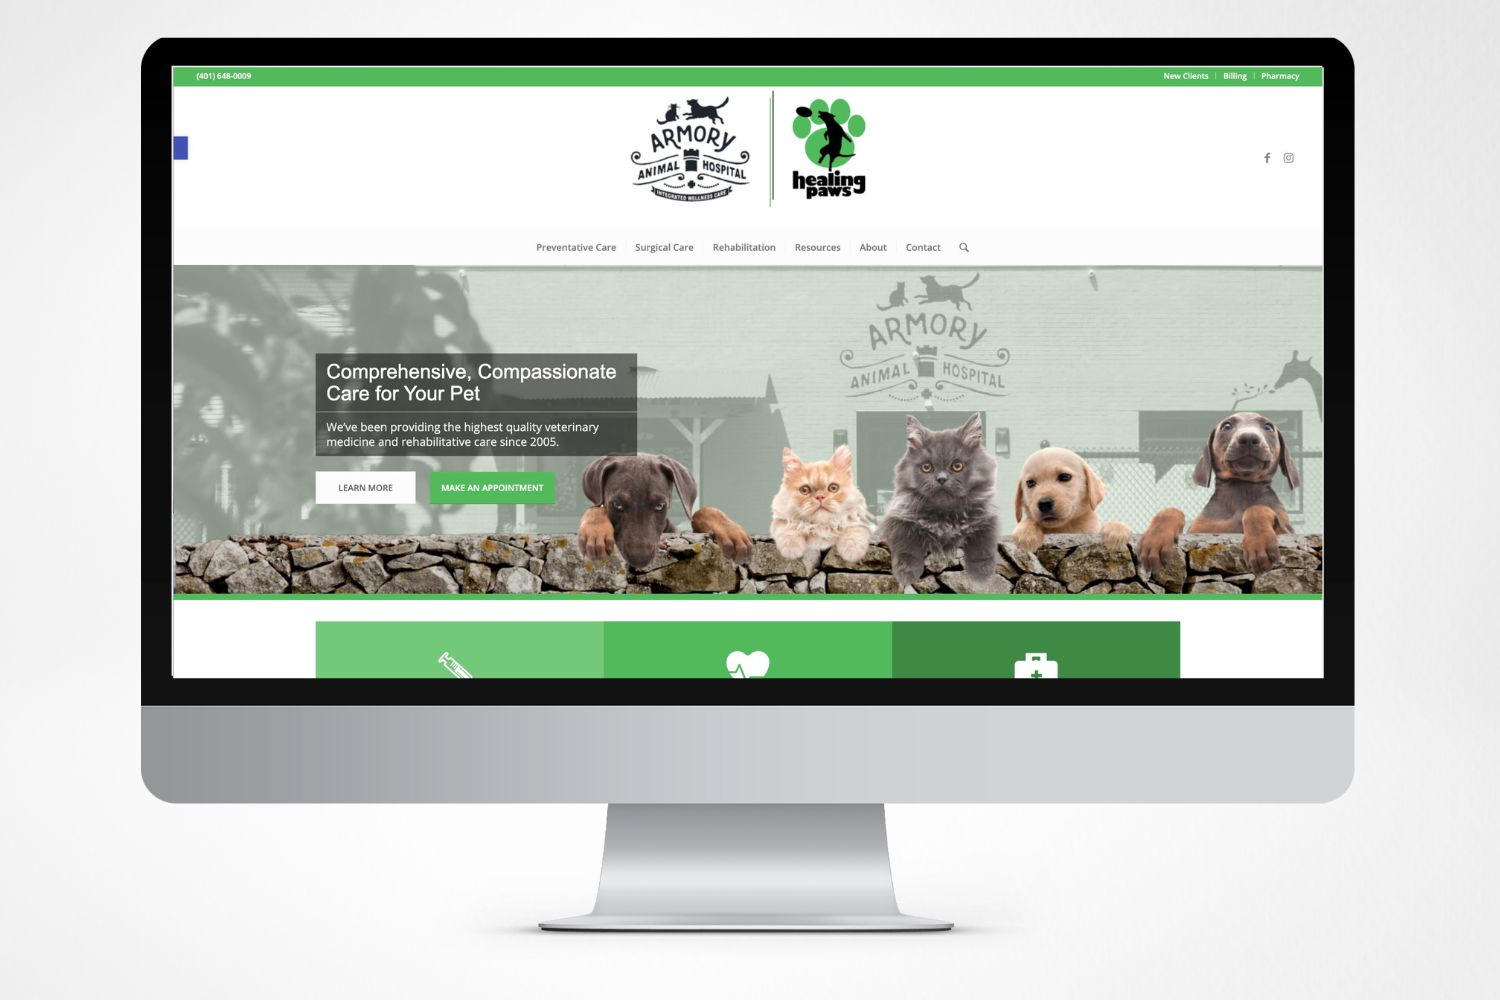 Image of the Armory Animal Hospital website's homepage